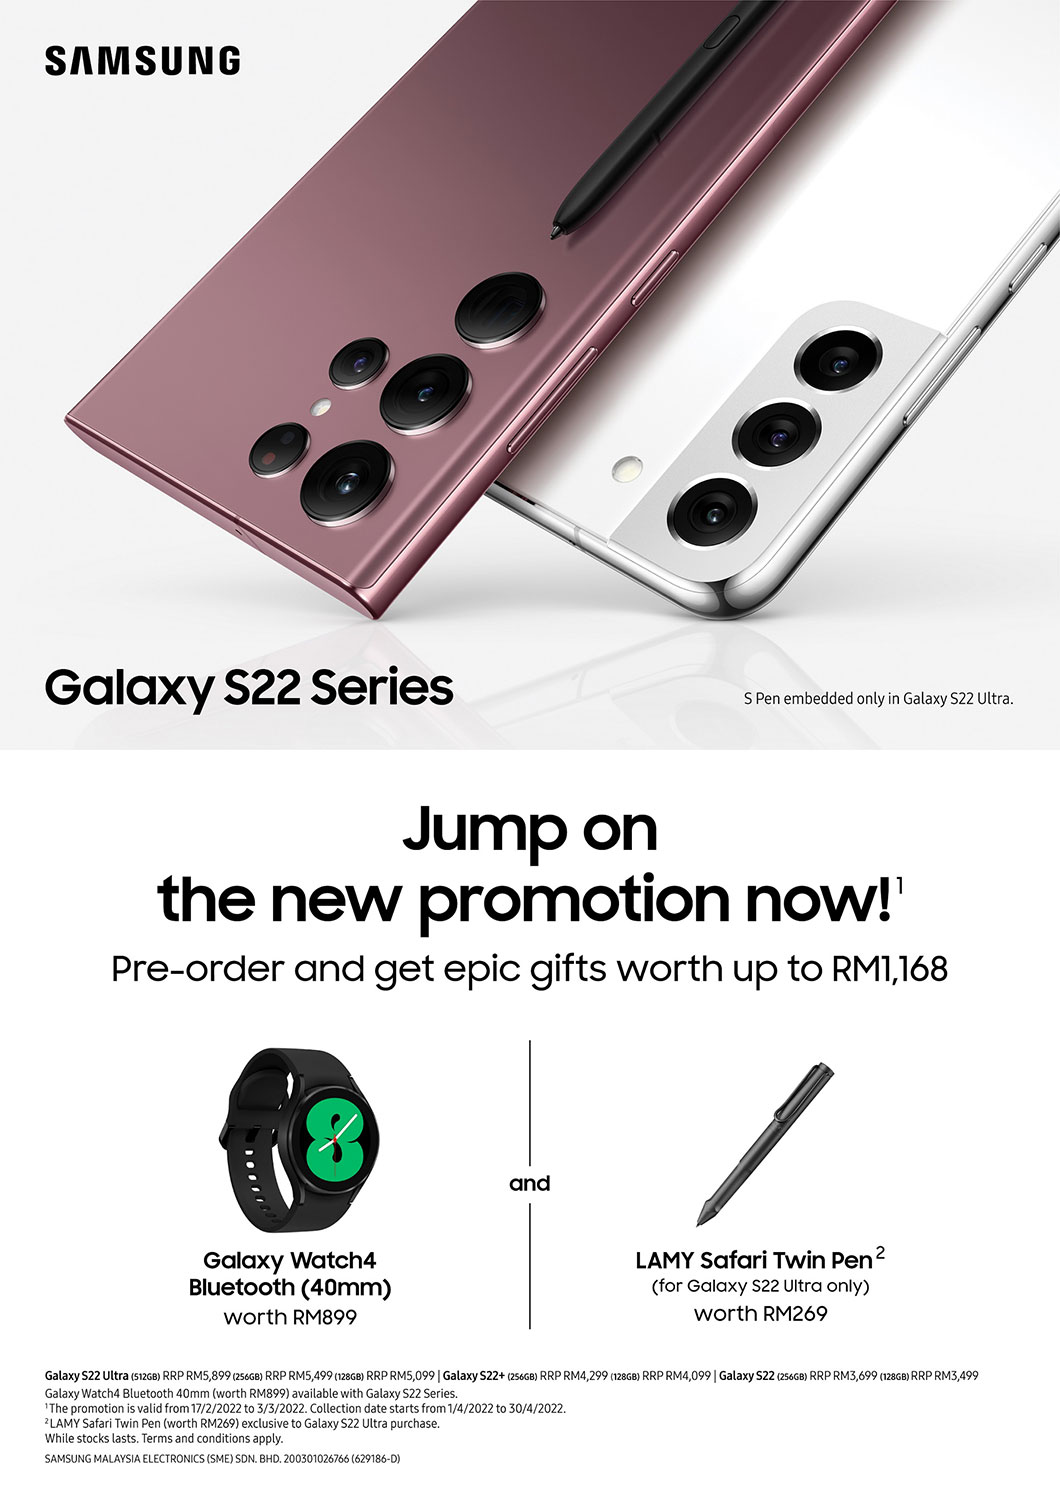 huurling auteur ramp Samsung Galaxy S22 Series Comes with a New Pre-Order Offer — GadgetMTech